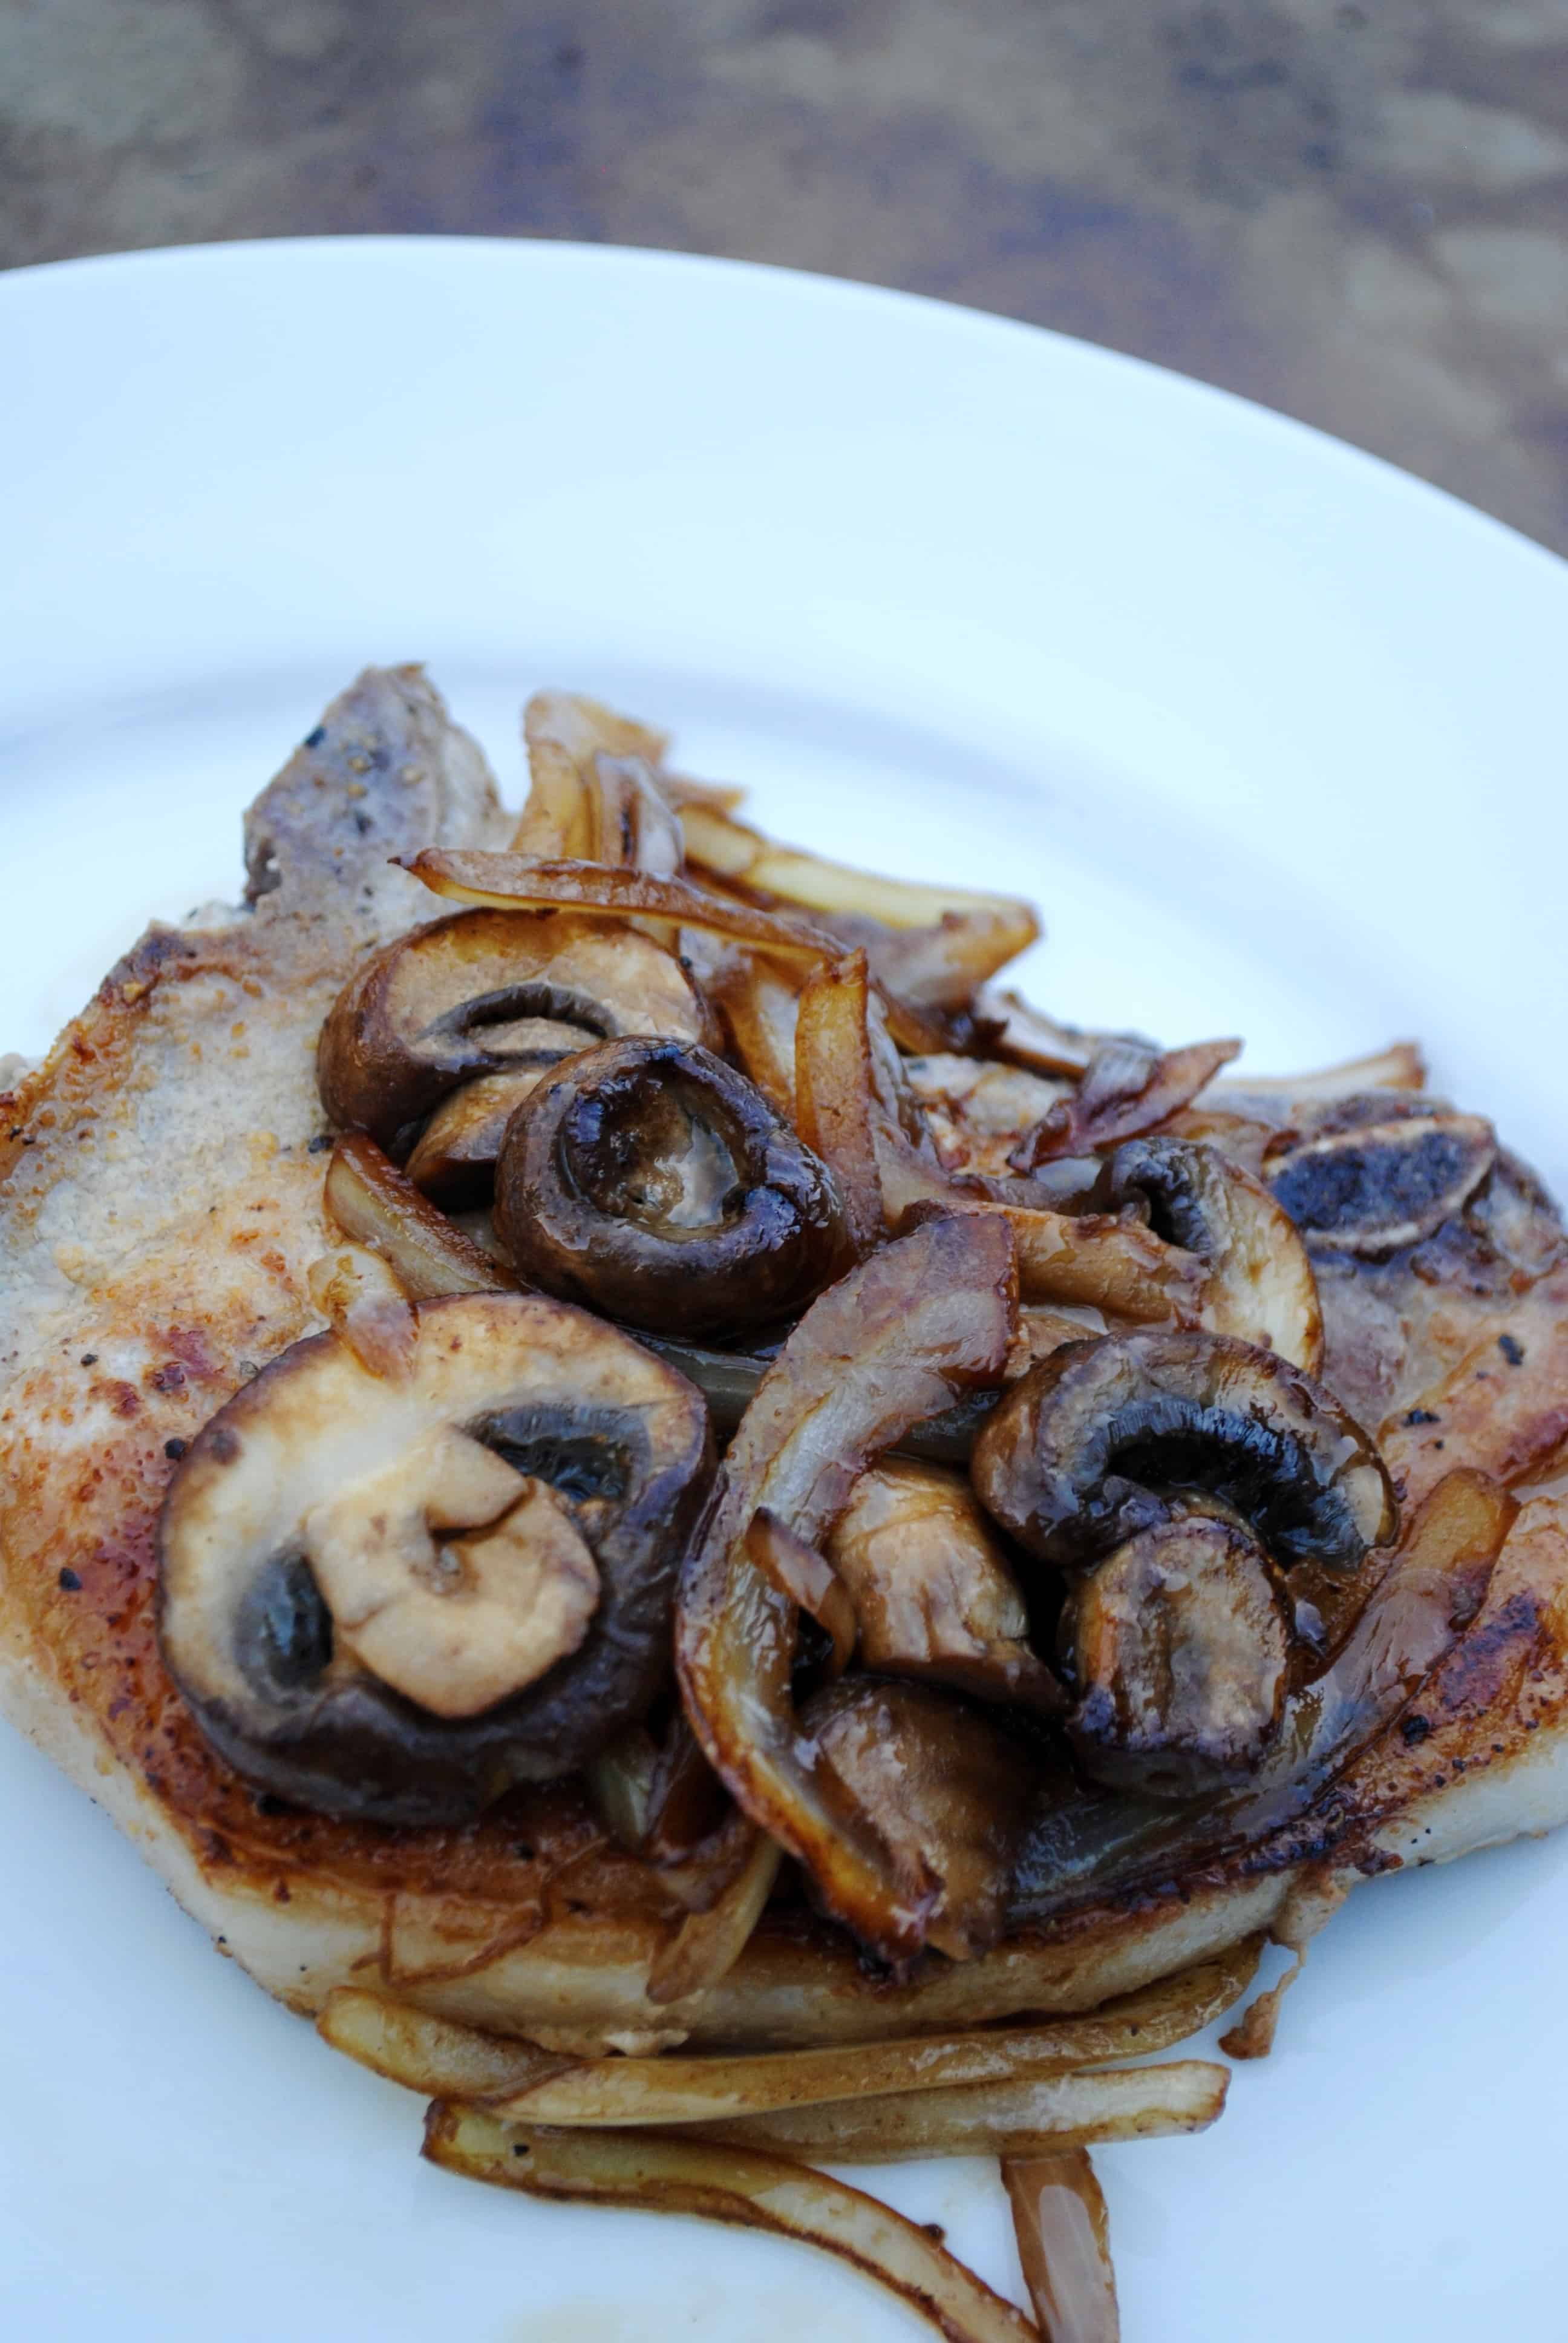 Pork chops smothered with onions and mushrooms. Simple meal, big on flavor.